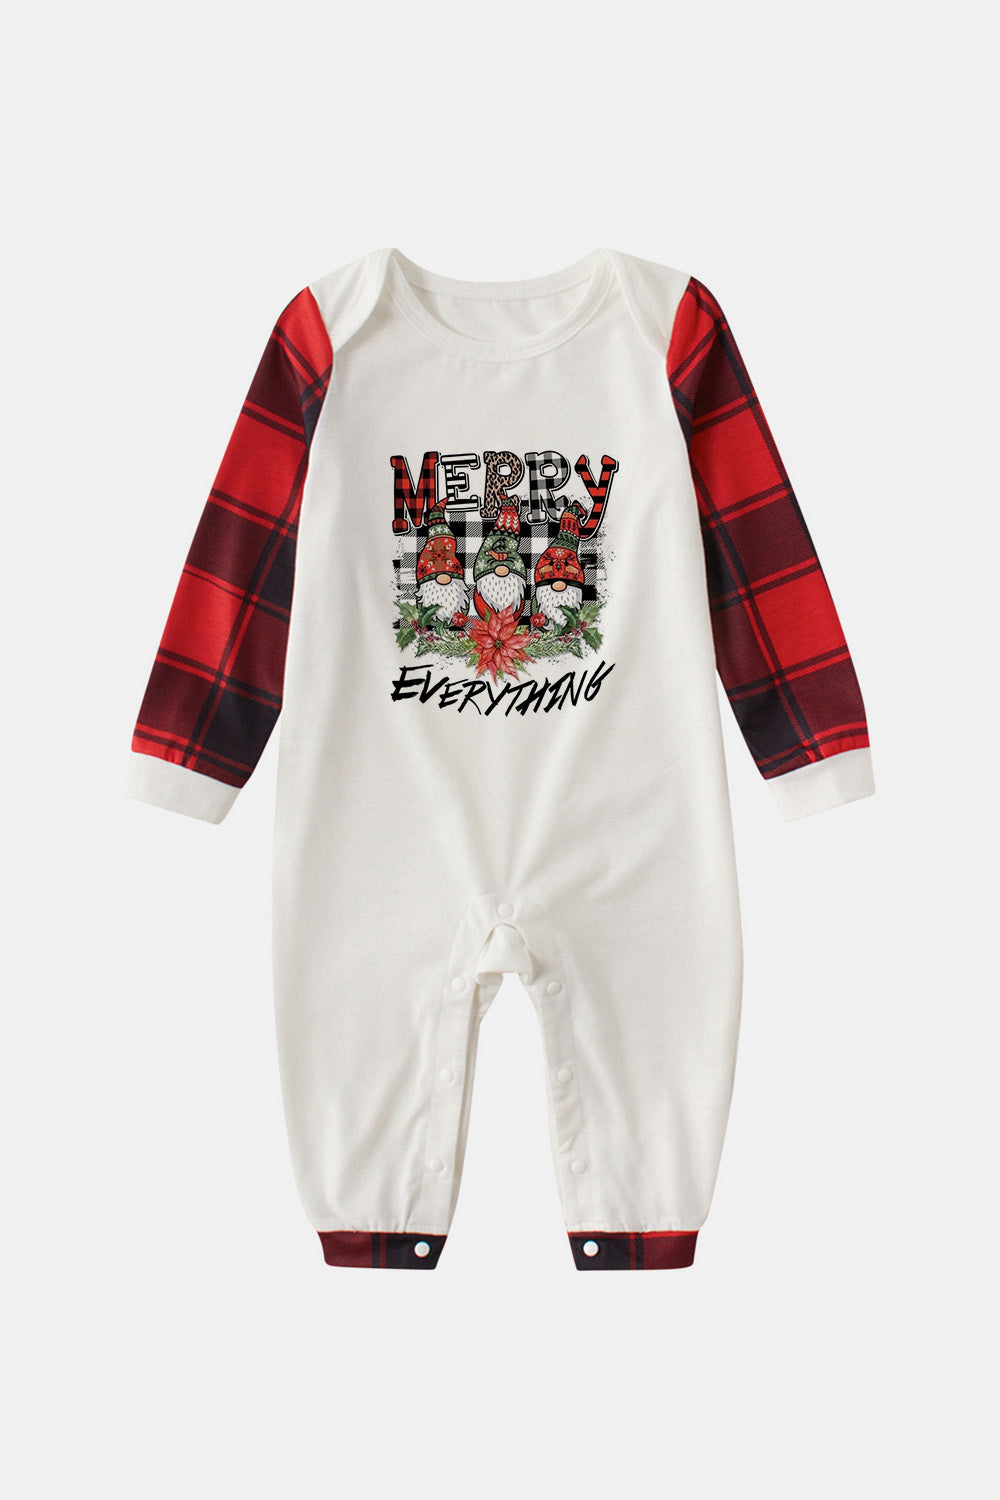 MERRY EVERYTHING Graphic Jumpsuit